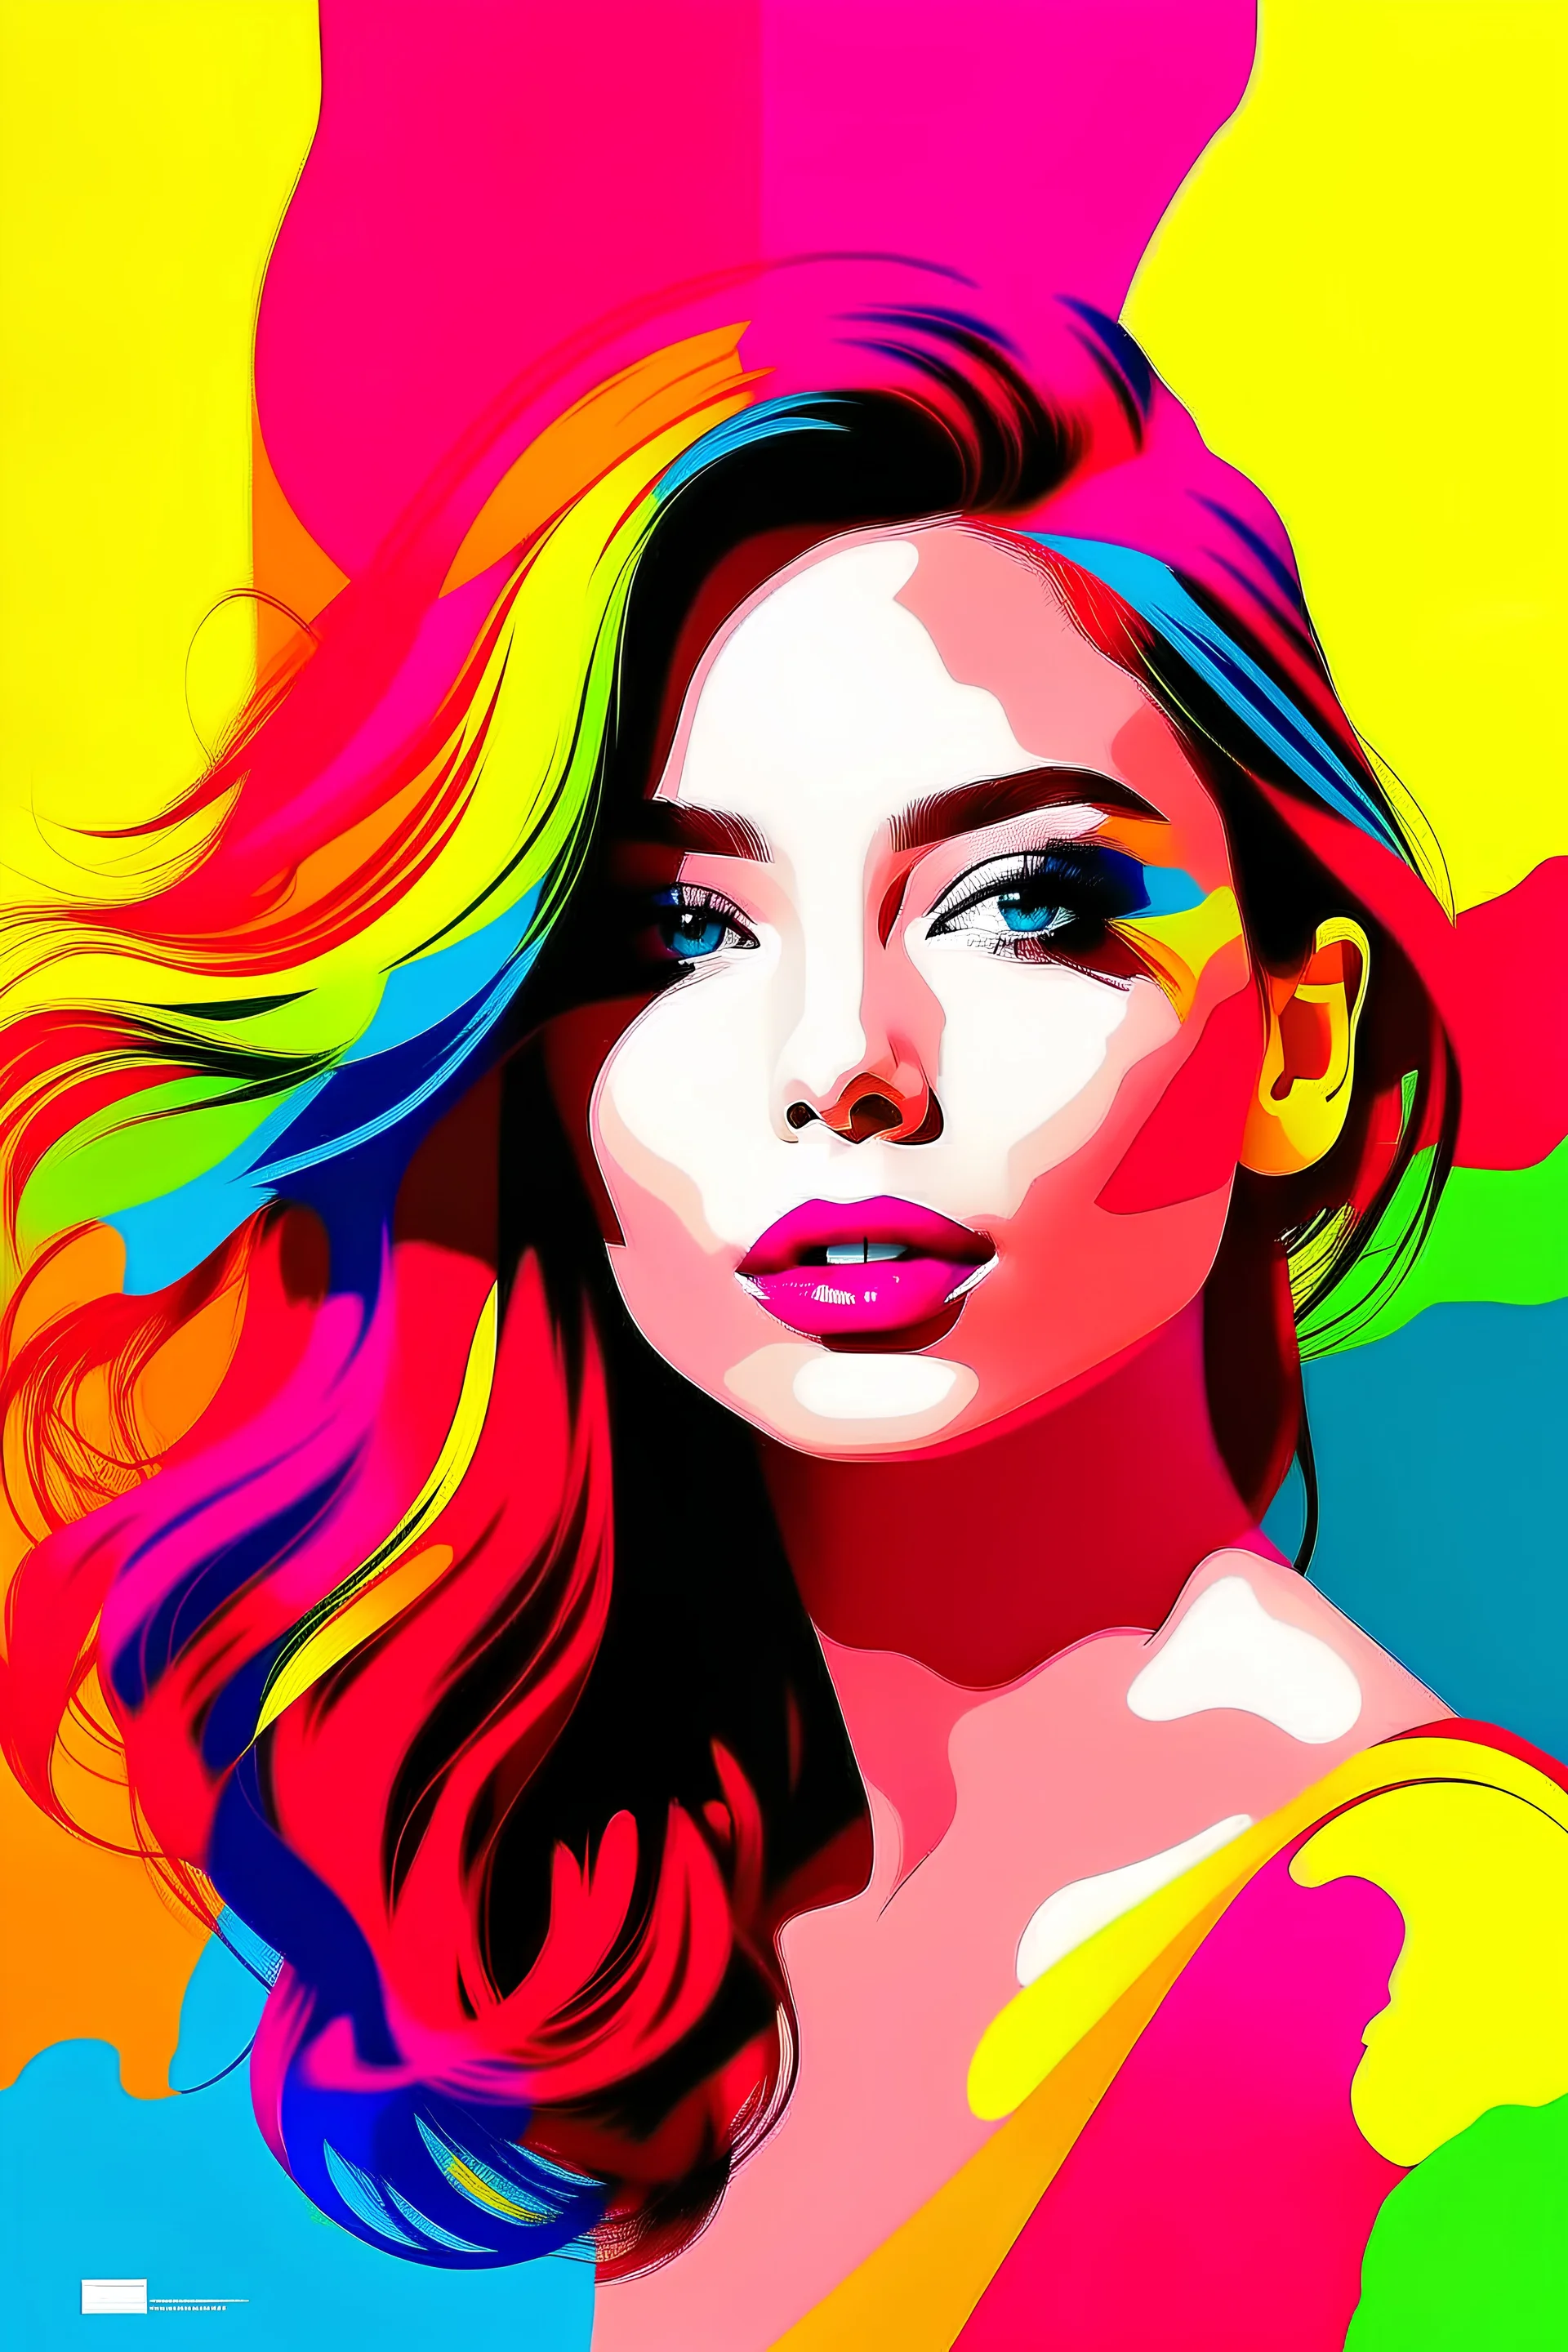 create a colorful girl image showing glamour and fashion